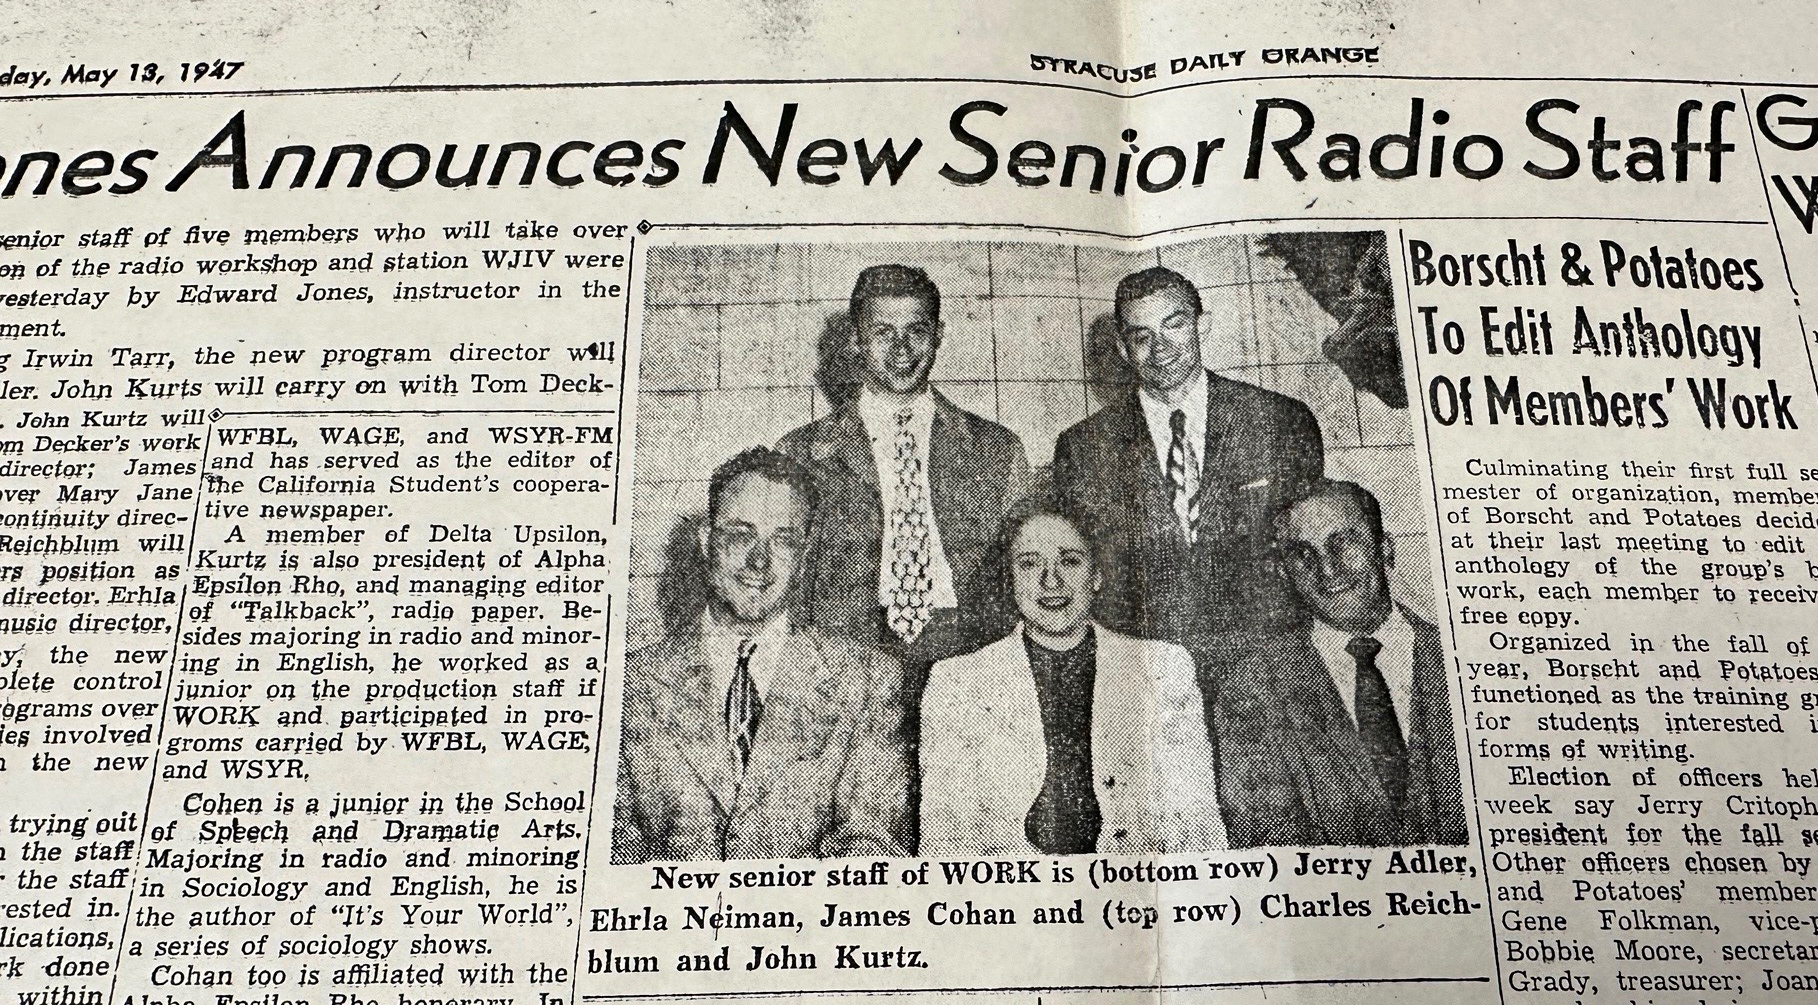 A newspaper clipping from May of 1947 announces the new senior radio staff members of WAER-FM.